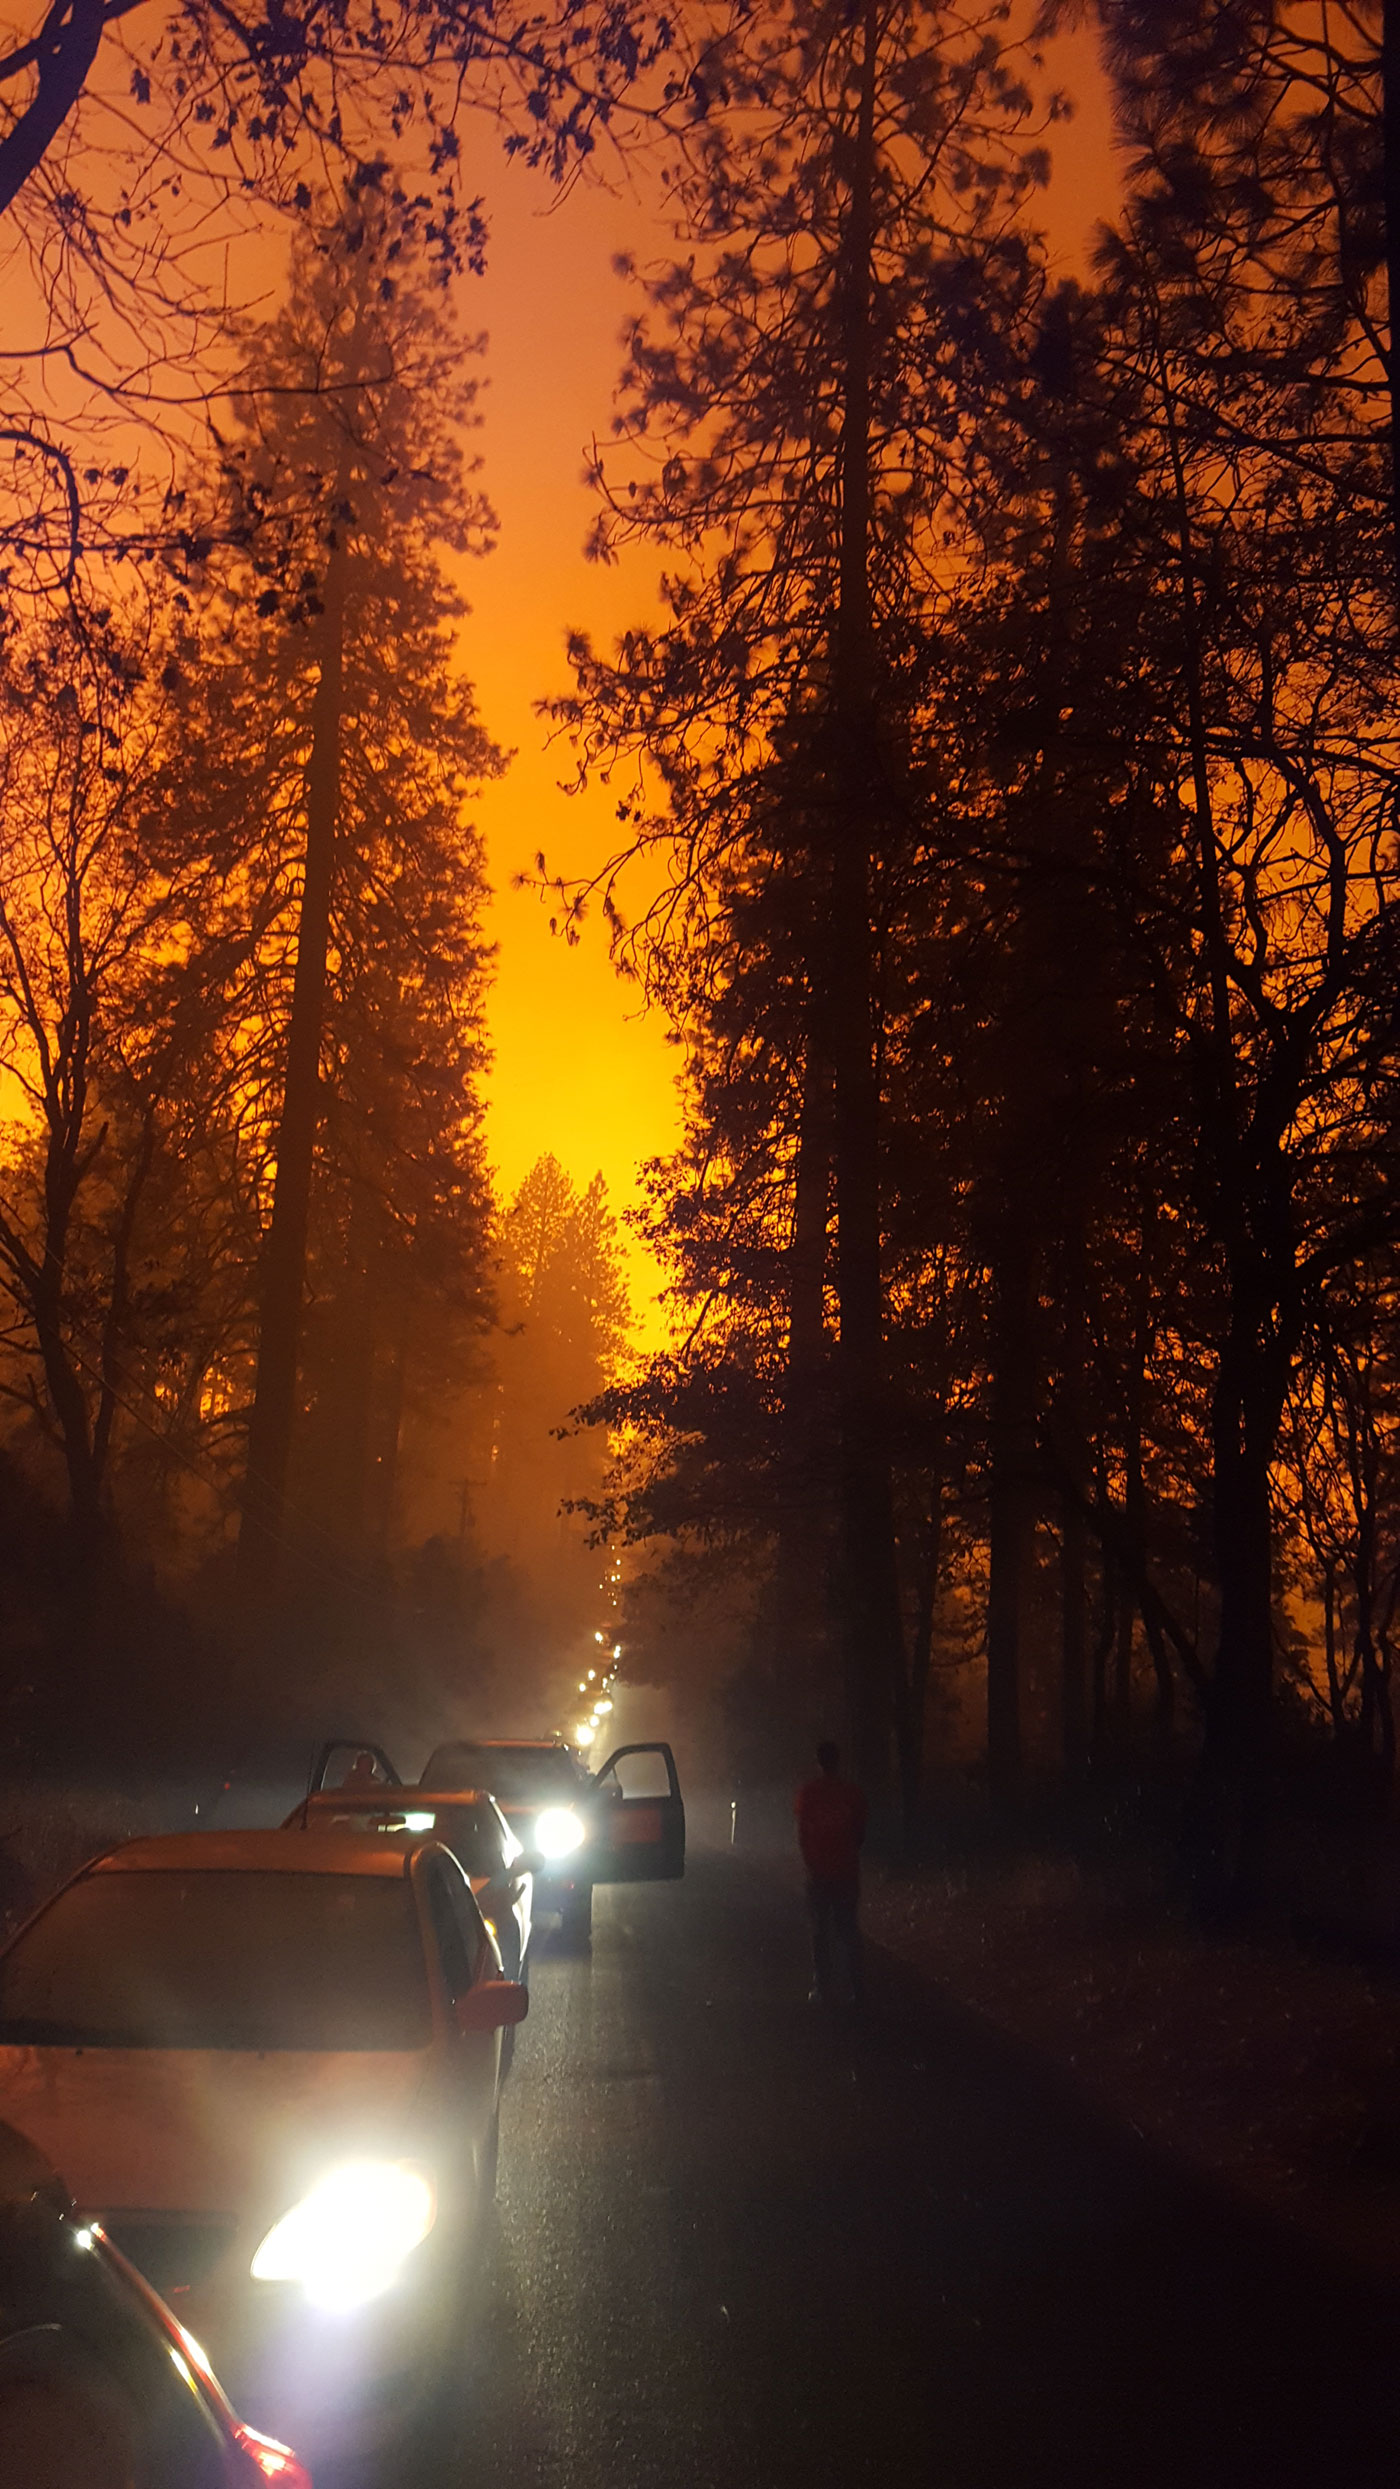 The author took this photo on Edgewood Lane in Paradise, California, as the Camp Fire closed in on everyone trapped there. Five people died on Edgewood Lane not long after this photo was taken.